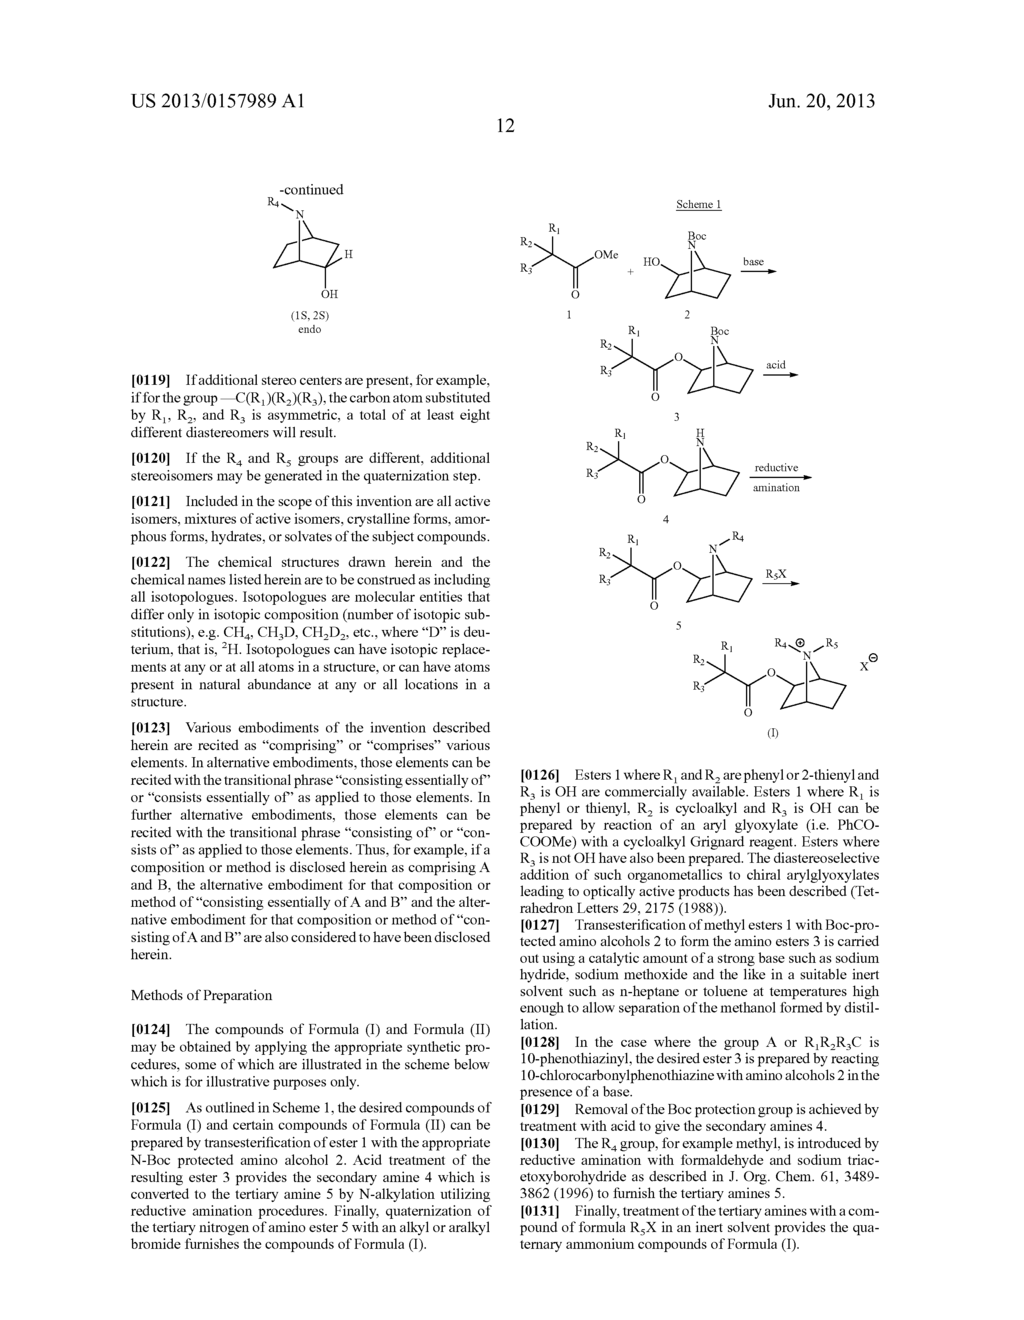 7-AZONIABICYCLO[2.2.1]HEPTANE DERIVATIVES, METHODS OF PRODUCTION, AND     PHARMACEUTICAL USES THEREOF - diagram, schematic, and image 15